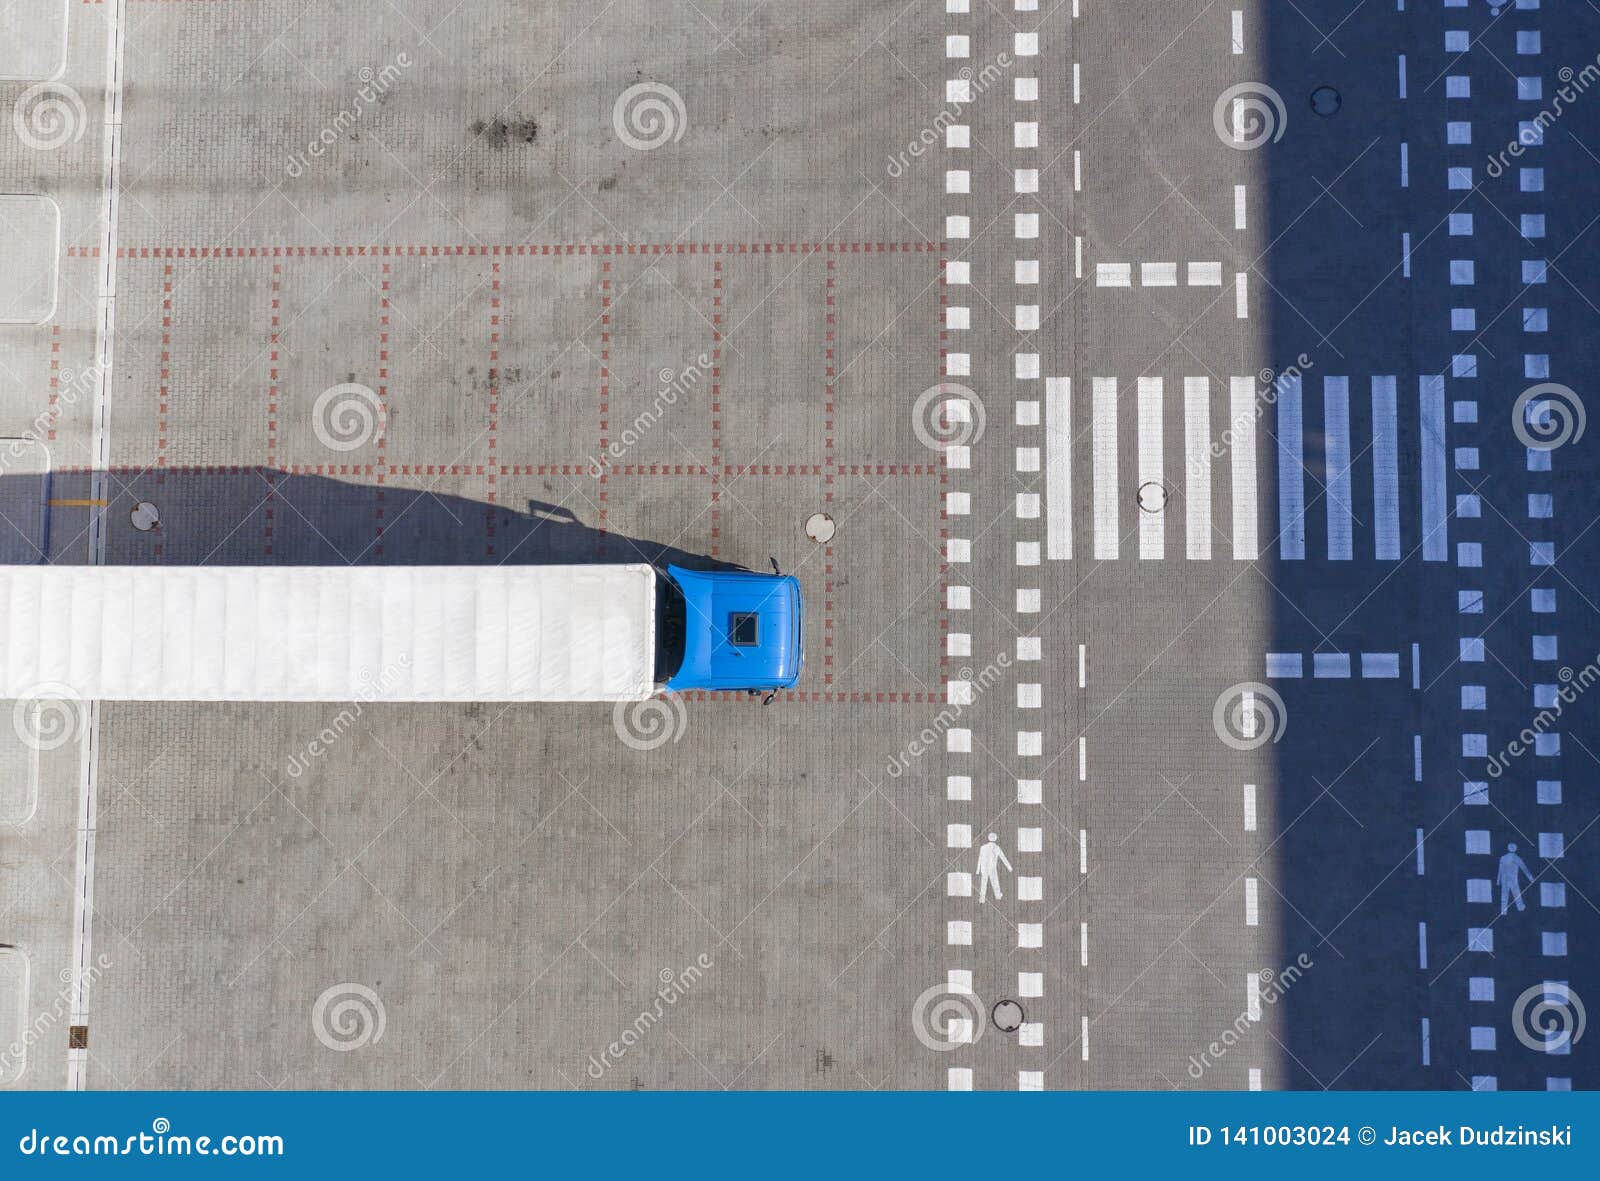 Aerial Top View Of White Semi Truck With Cargo Trailer Parking With Other Vehicles On Special Parking Lot Stock Photo Image Of Heavy Business 141003024